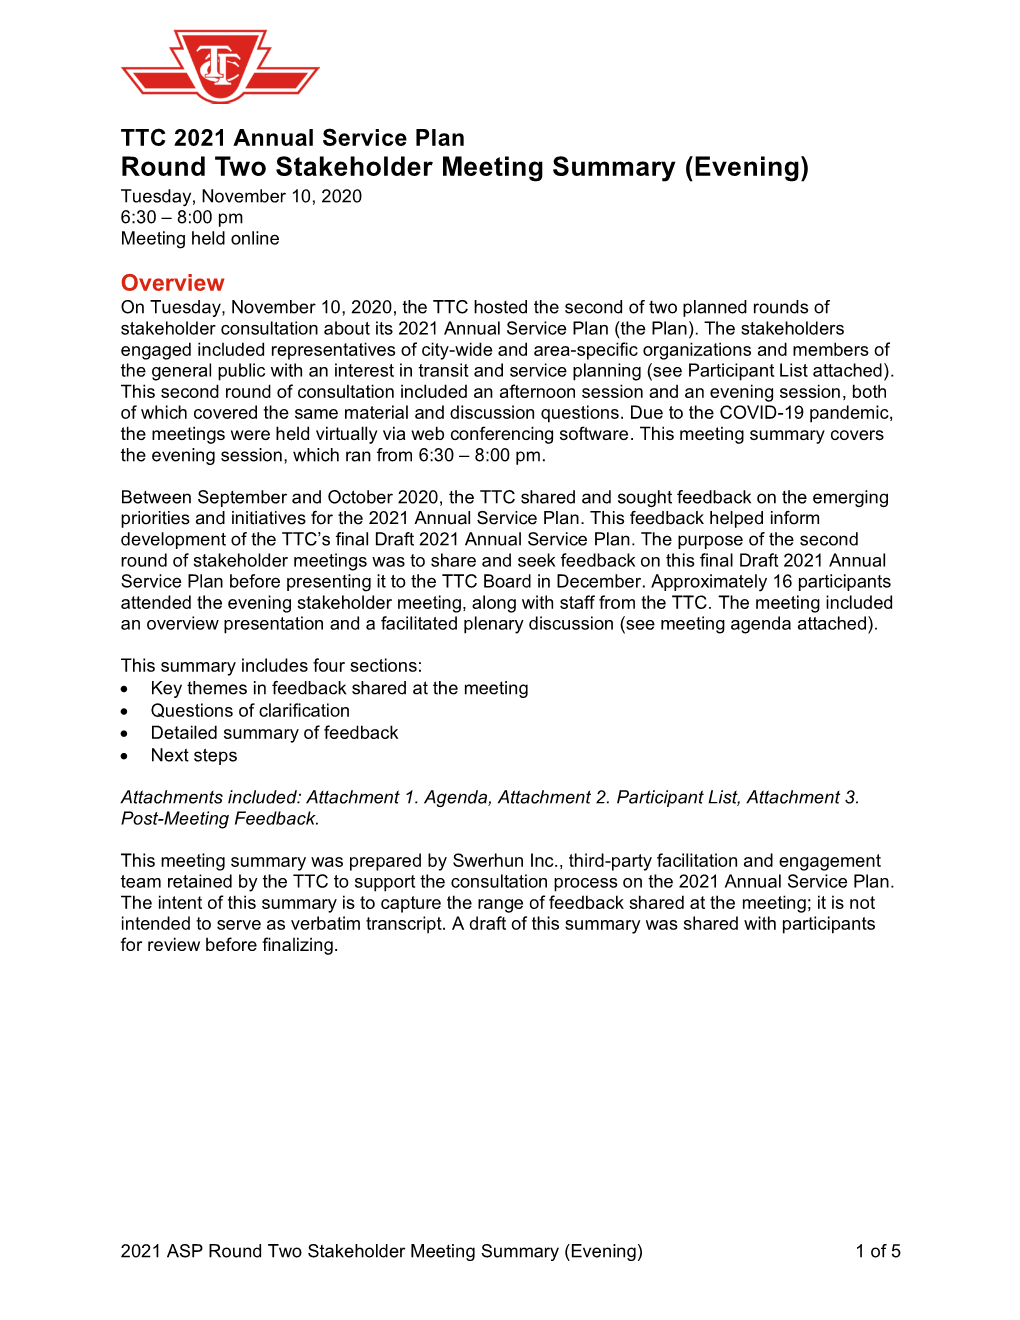 Stakeholder Meeting 2 Summary, Evening Session